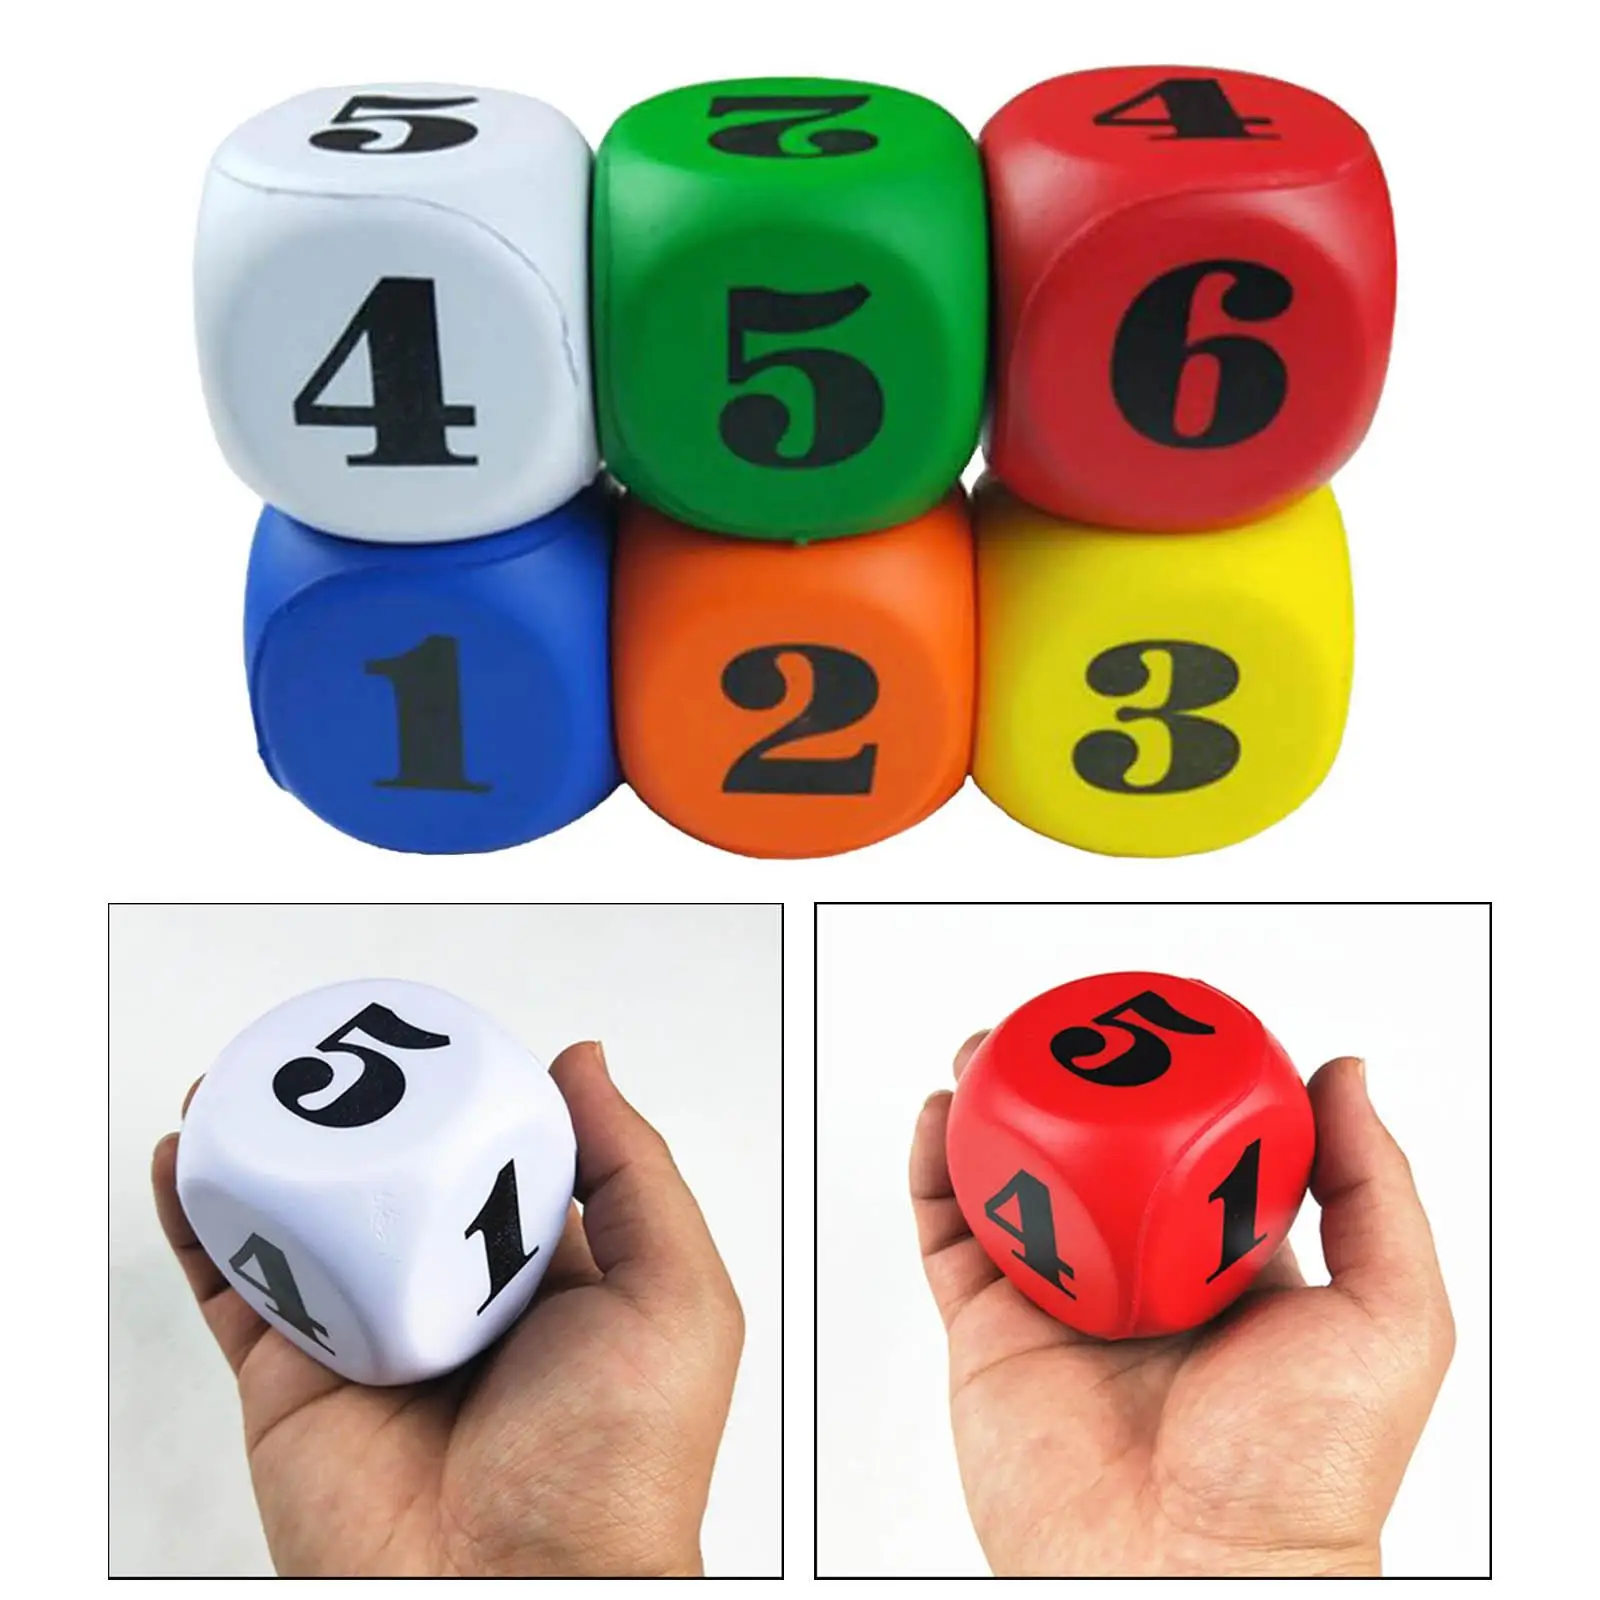 6 Pieces Foam Dice Number Digital Dices Early Math Skills Playing Game Dice Round Corner Square Dice for Ages 3+ Math Games